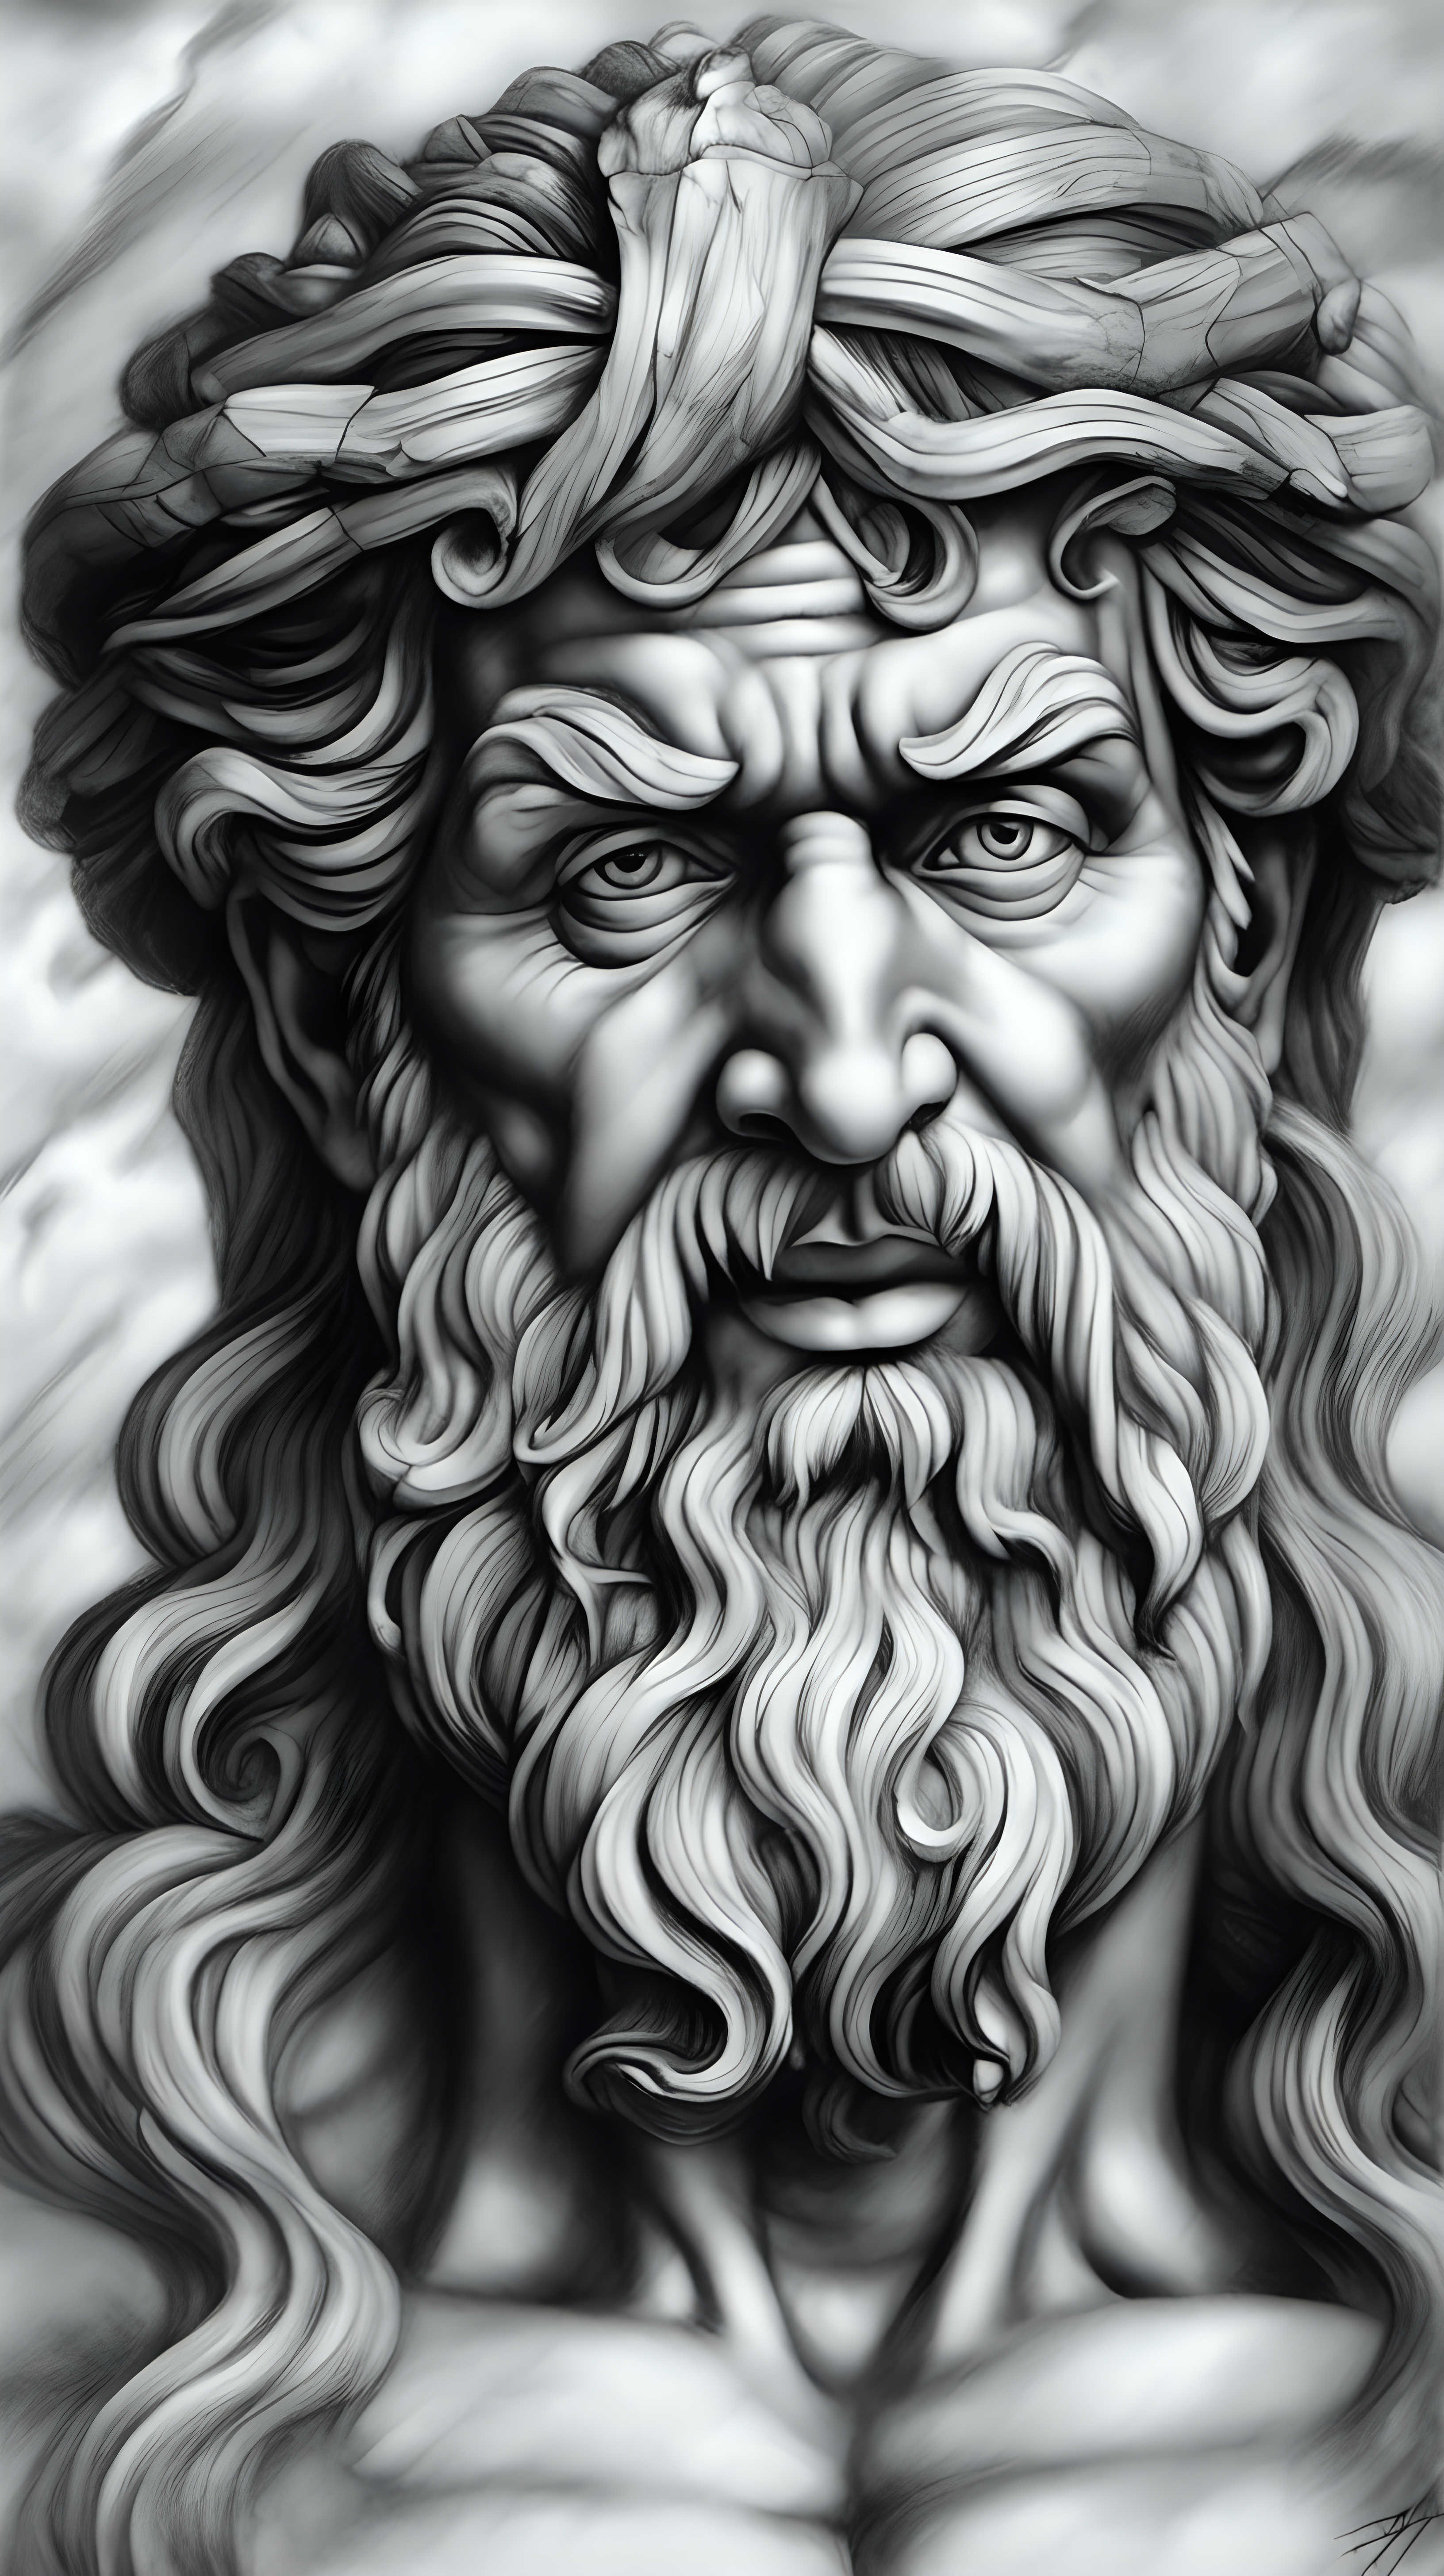 /imagine prompt : a hyper realistic black and gray Michelangelo drawing, feauteringr gods, gods & goddesses greek mytology
[face portrait]
-no cut
<background>thunder and lightning
<style>pencil drawing
_ar 9:16